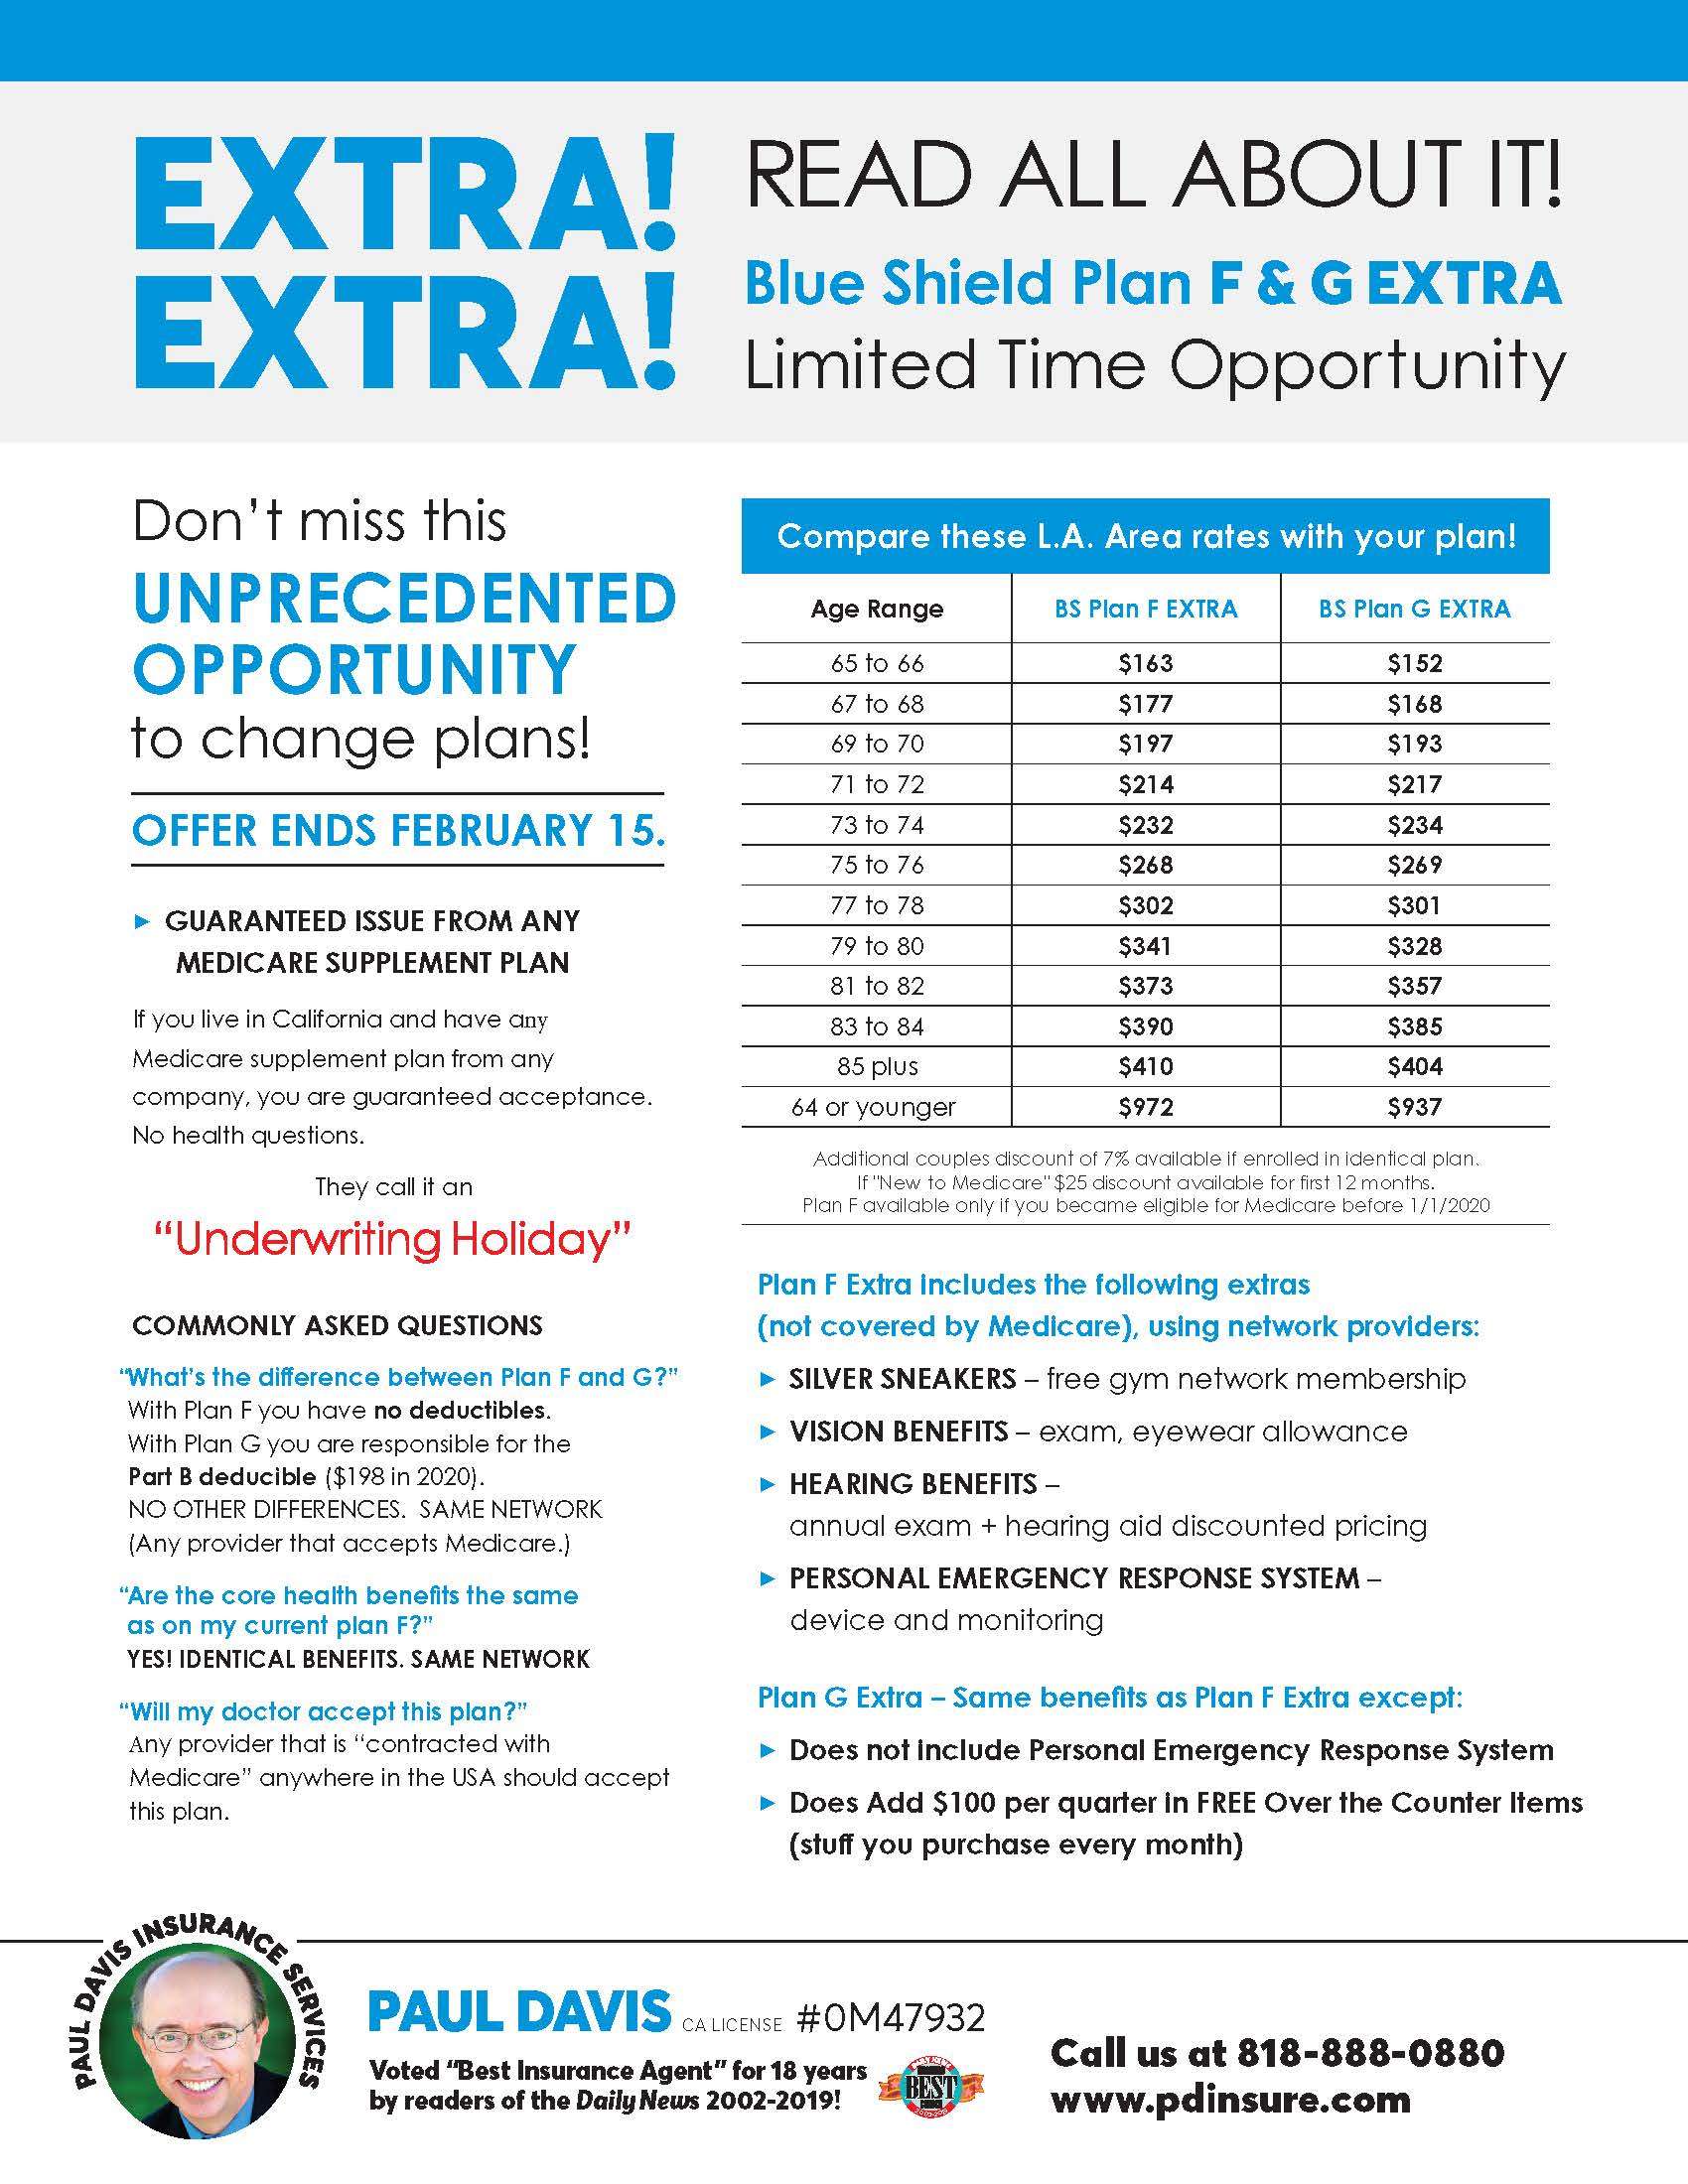 The Blue Shield Underwriting Holiday is back. Unprecedented opportunity to change Medicare Supplement plans. Click on the graphic to being up a larger PDF file.